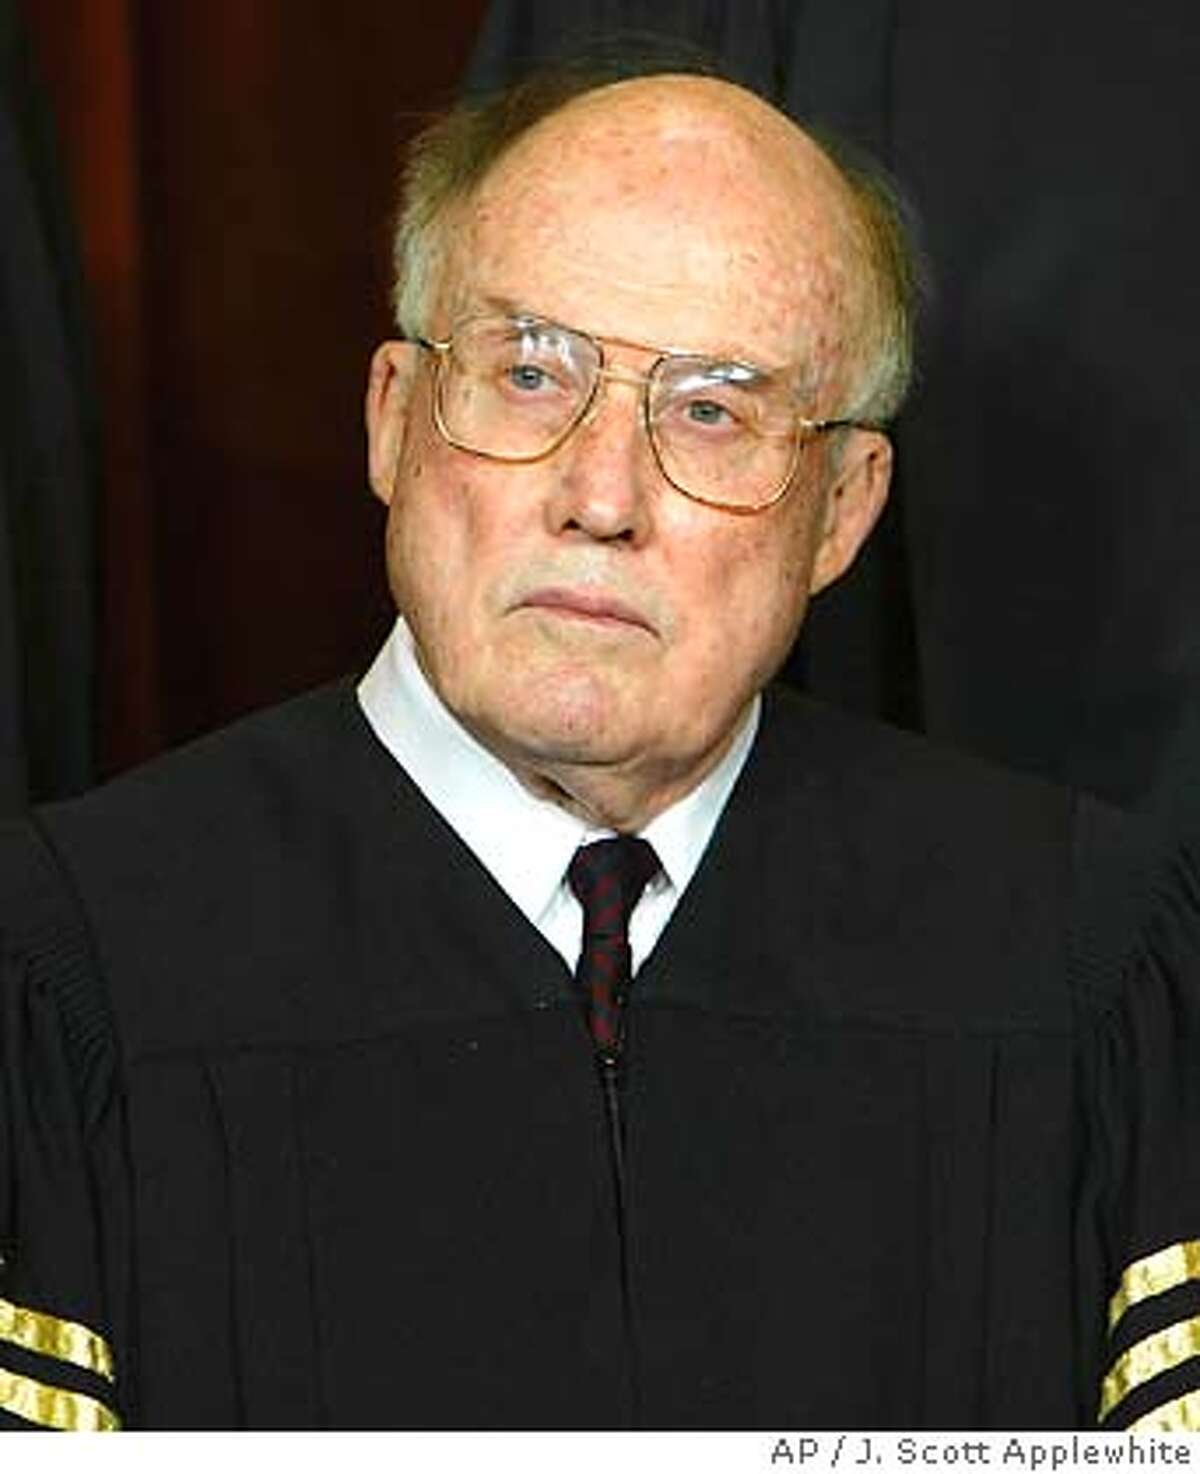 ** FILE ** Chief Justice of the United States William H. Rehnquist is seen in a file photo taken at the Supreme Court Building in Washington Dec. 05, 2003. Rehnquist has been hospitalized with thyroid cancer. (AP Photo/J. Scott Applewhite, File) Ran on: 10-26-2004 Chief Justice William Rehnquist, 80, underwent a tracheotomy over the weekend. Ran on: 10-26-2004 Chief Justice William Rehnquist, 80, underwent a tracheotomy over the weekend. Ran on: 11-14-2004 William Rehnquist, 80, was nominated by Richard Nixon and elevated by Ronald Reagan. Ran on: 11-14-2004 William Rehnquist, 80, was nominated by Richard Nixon and elevated by Ronald Reagan. DEC. 5, 2003 FILE PHOTO Ran on: 01-01-2005 William Rehnquist, chief justice, thanked those who have wished him a speedy recovery.